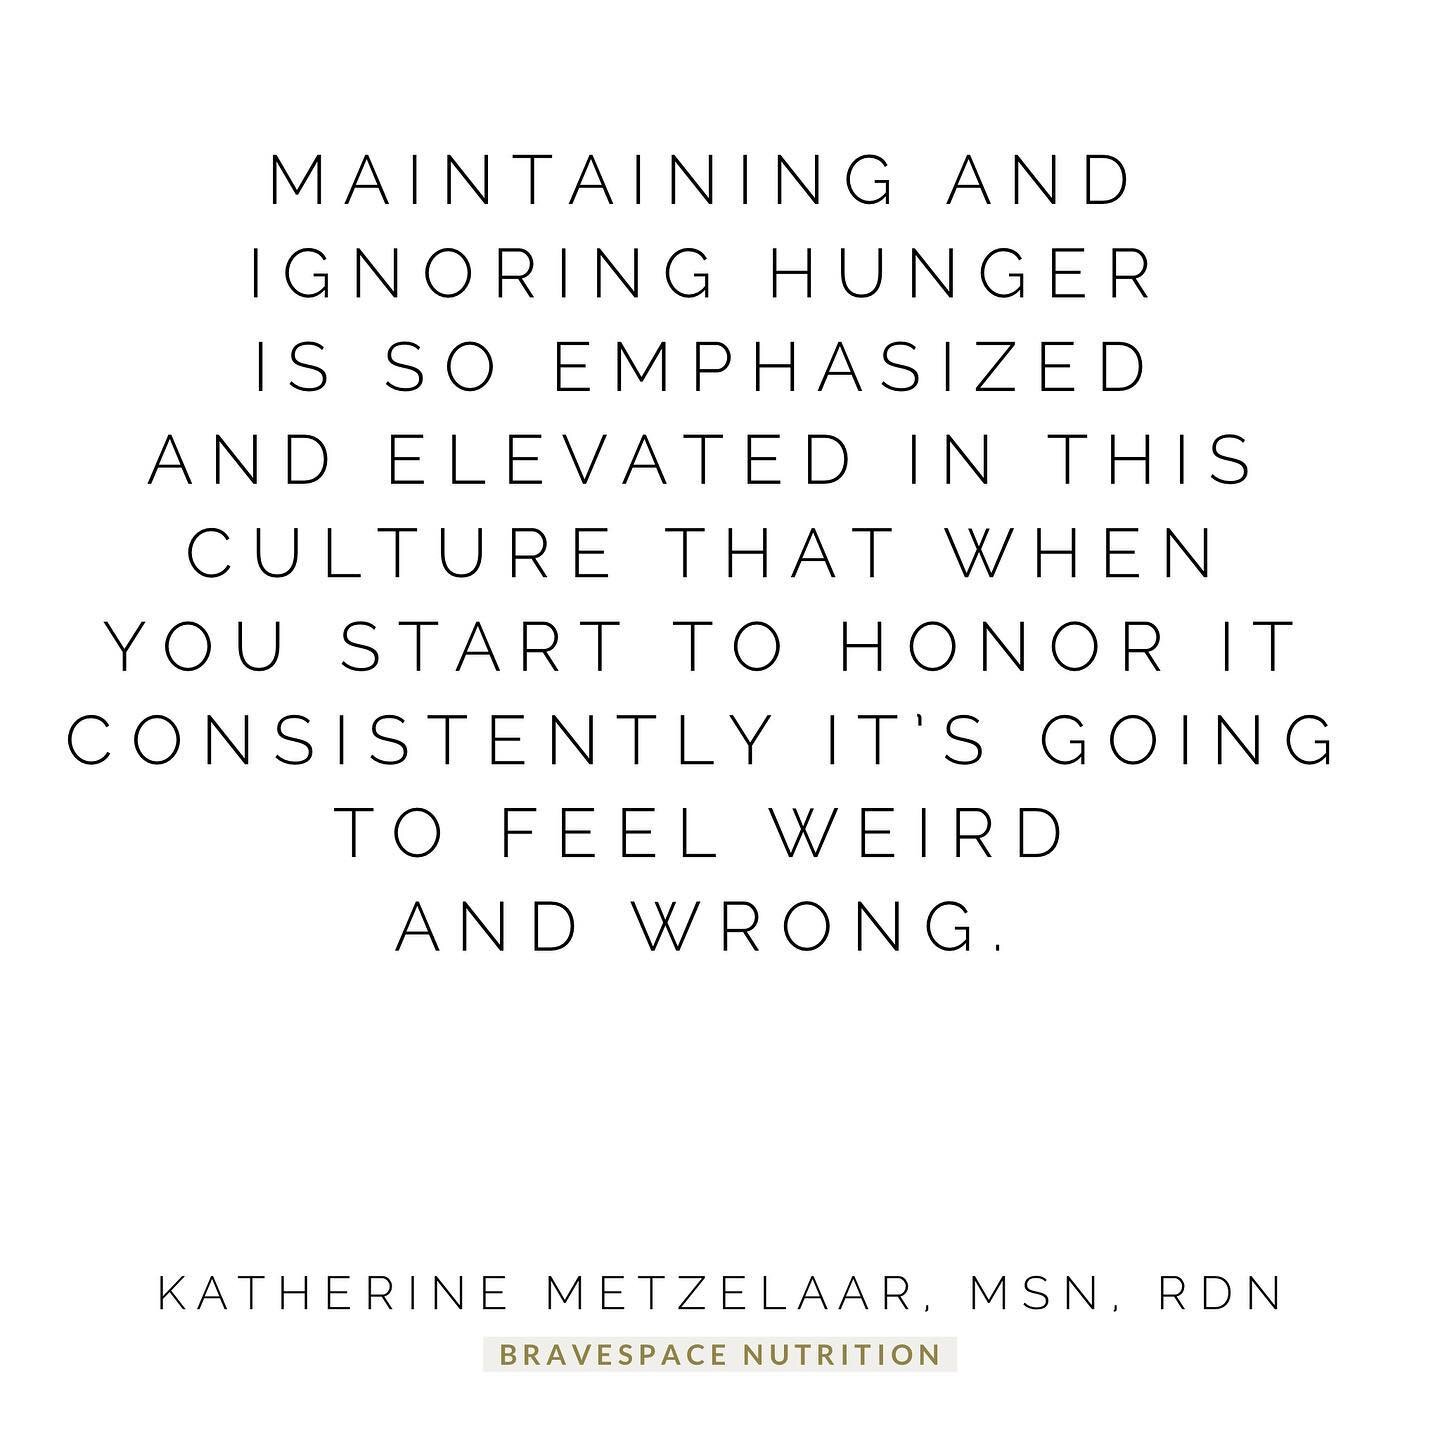 Maintaining and ignoring hunger is so emphasized and elevated in this culture that when you start to honor it consistently it&rsquo;s going to feel weird⁣
and wrong. ⁣
⁣
This culture works hard to convince you NOT to eat, to ignore it, to distract fr